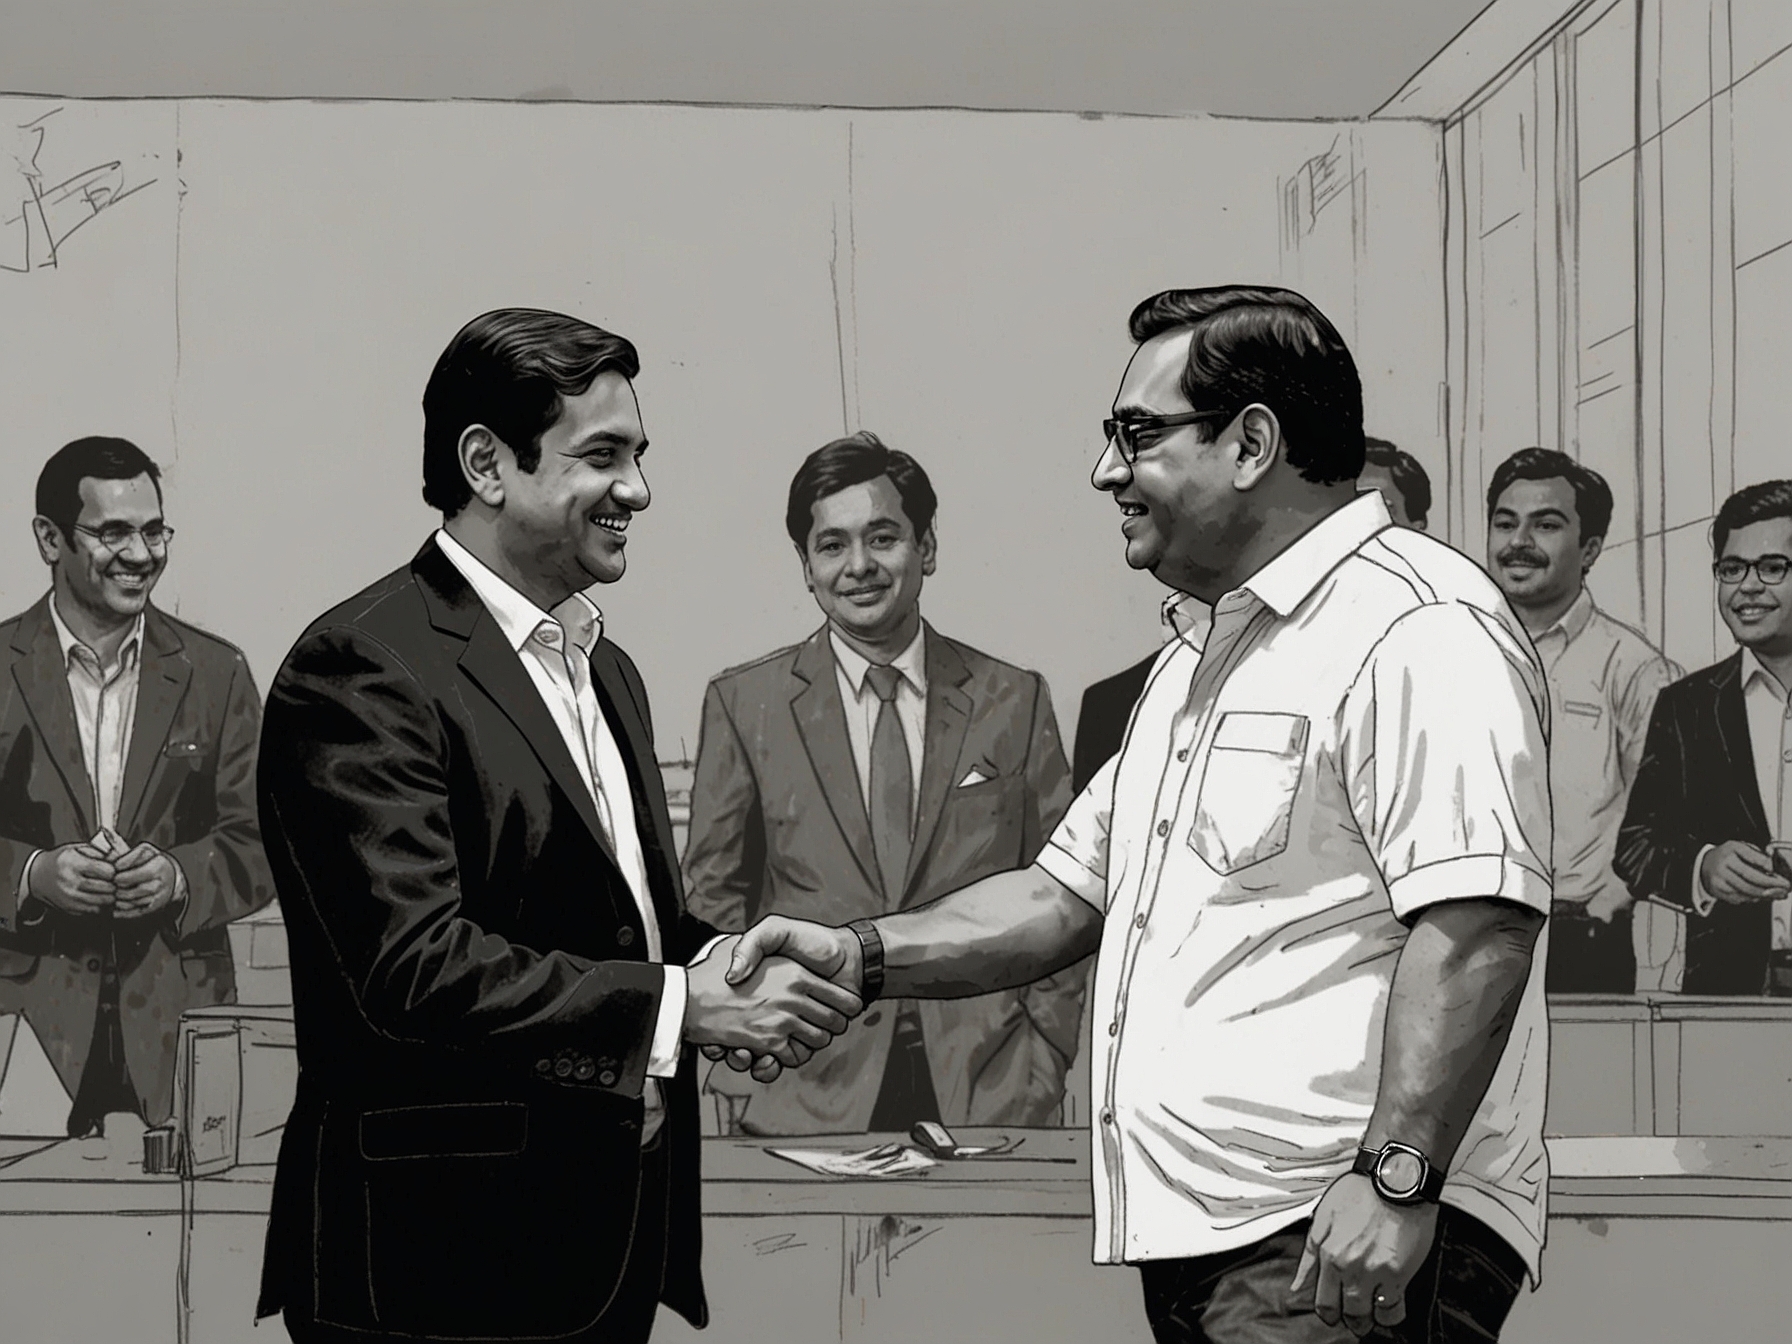 An illustration showing Zomato's CEO, Deepinder Goyal, shaking hands with Paytm’s representative, symbolizing the acquisition of the movie-ticketing business, with entertainment icons in the background.